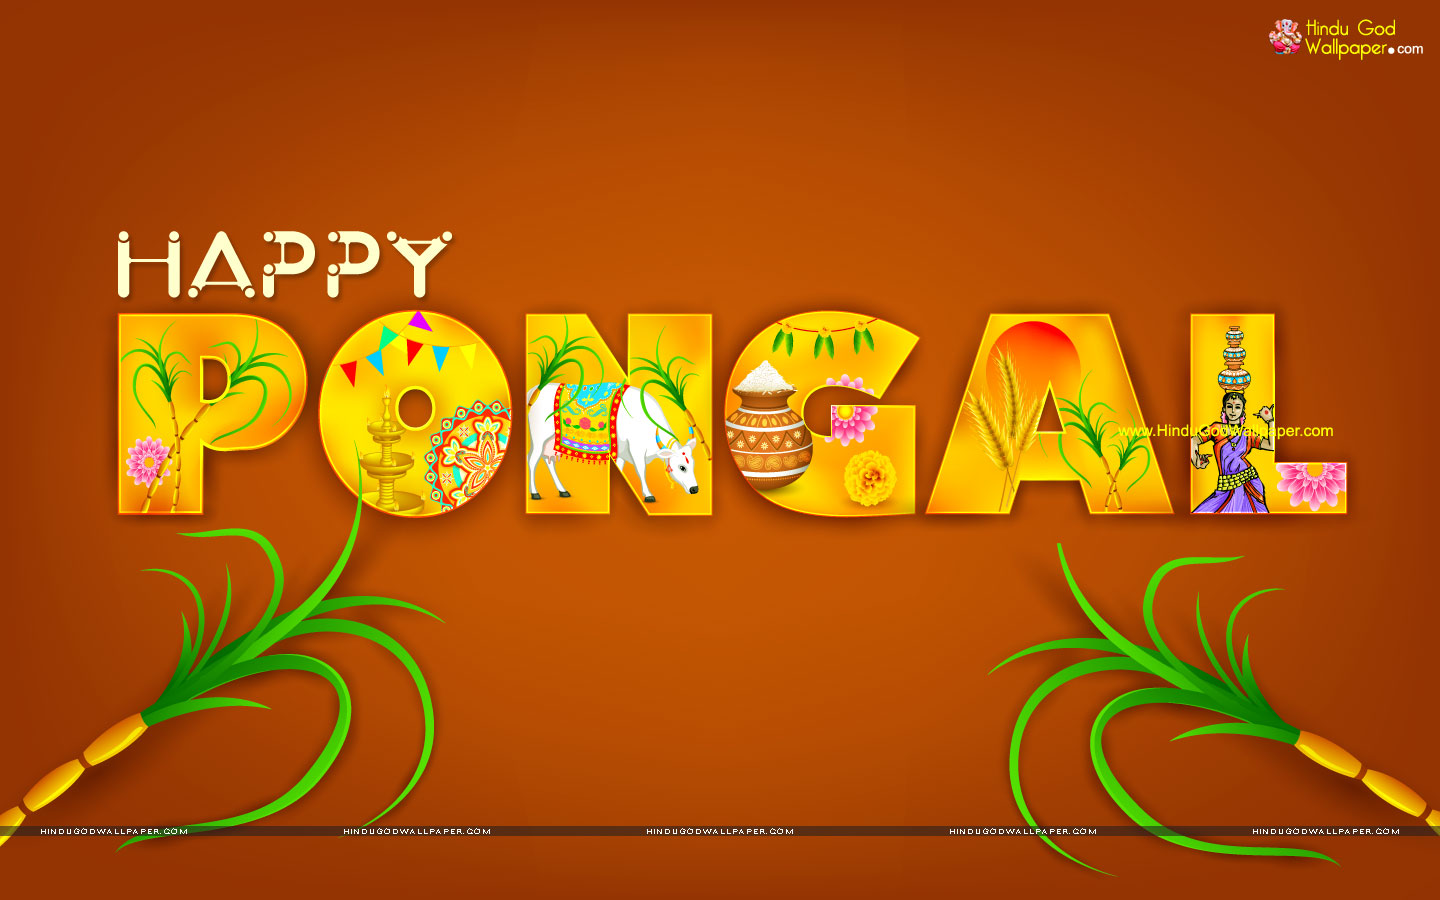 Happy Pongal 2018 Wallpapers, Photos & Images Free Download